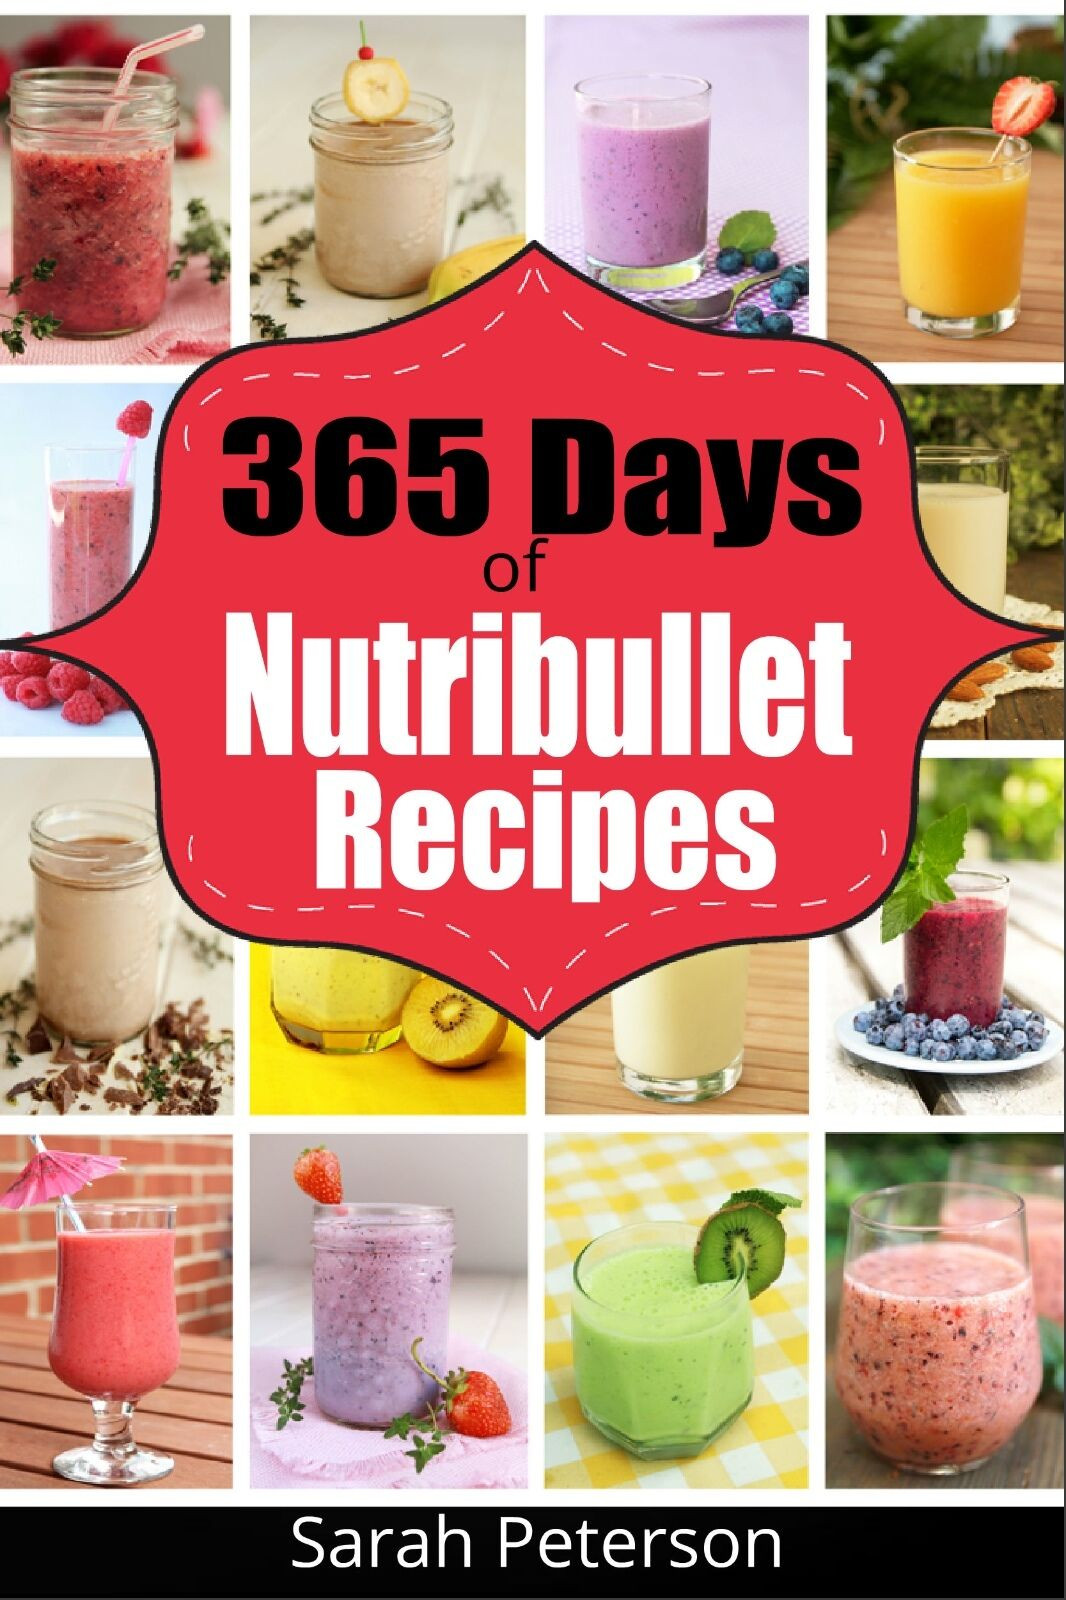 Nutribullet Recipes For Weight Loss
 Nutribullet Recipes 365 Days of Smoothie Recipes for